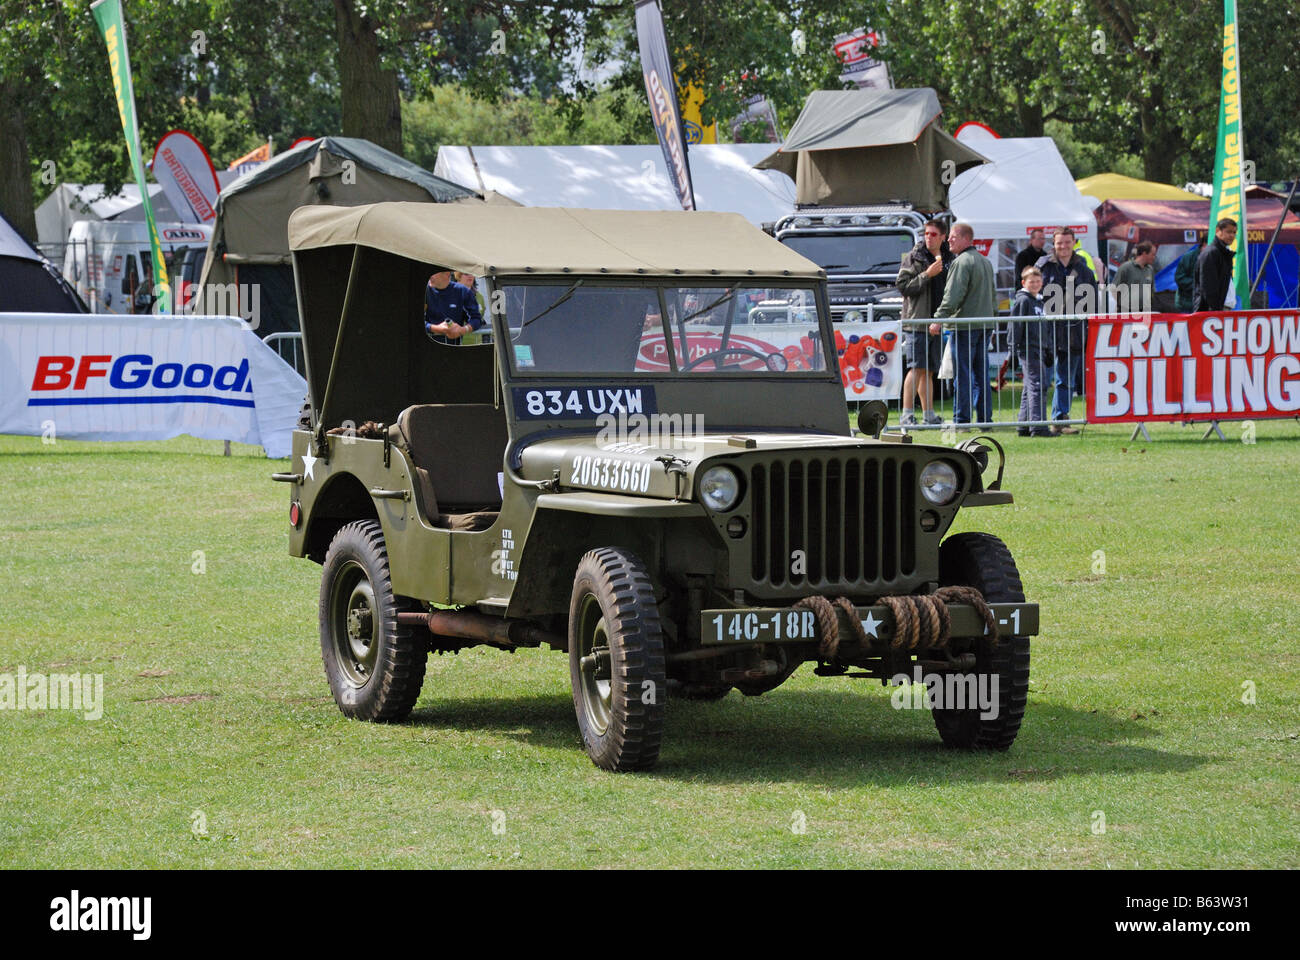 World War II issue 1 Ton Jeep in the arena Registration number 834 UXW number 20633660 number on bumper 14C 18R 4WD four wheel Stock Photo